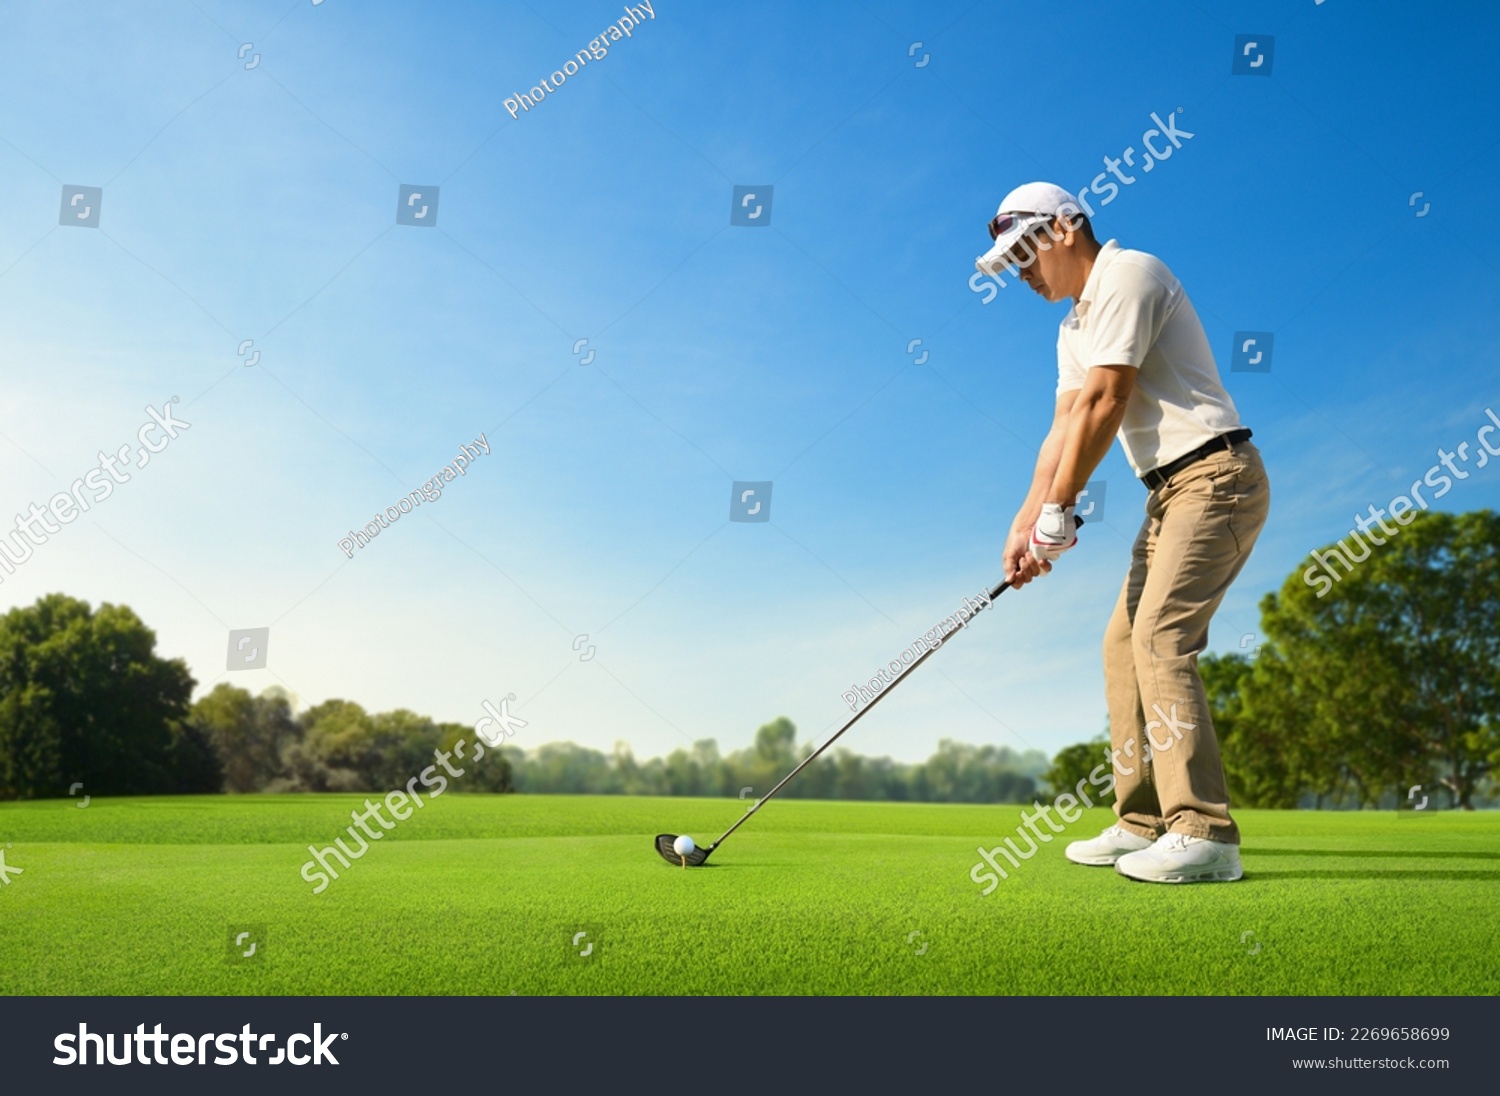 Golfer ready tee-off with drivers on golf teeing ground. #2269658699